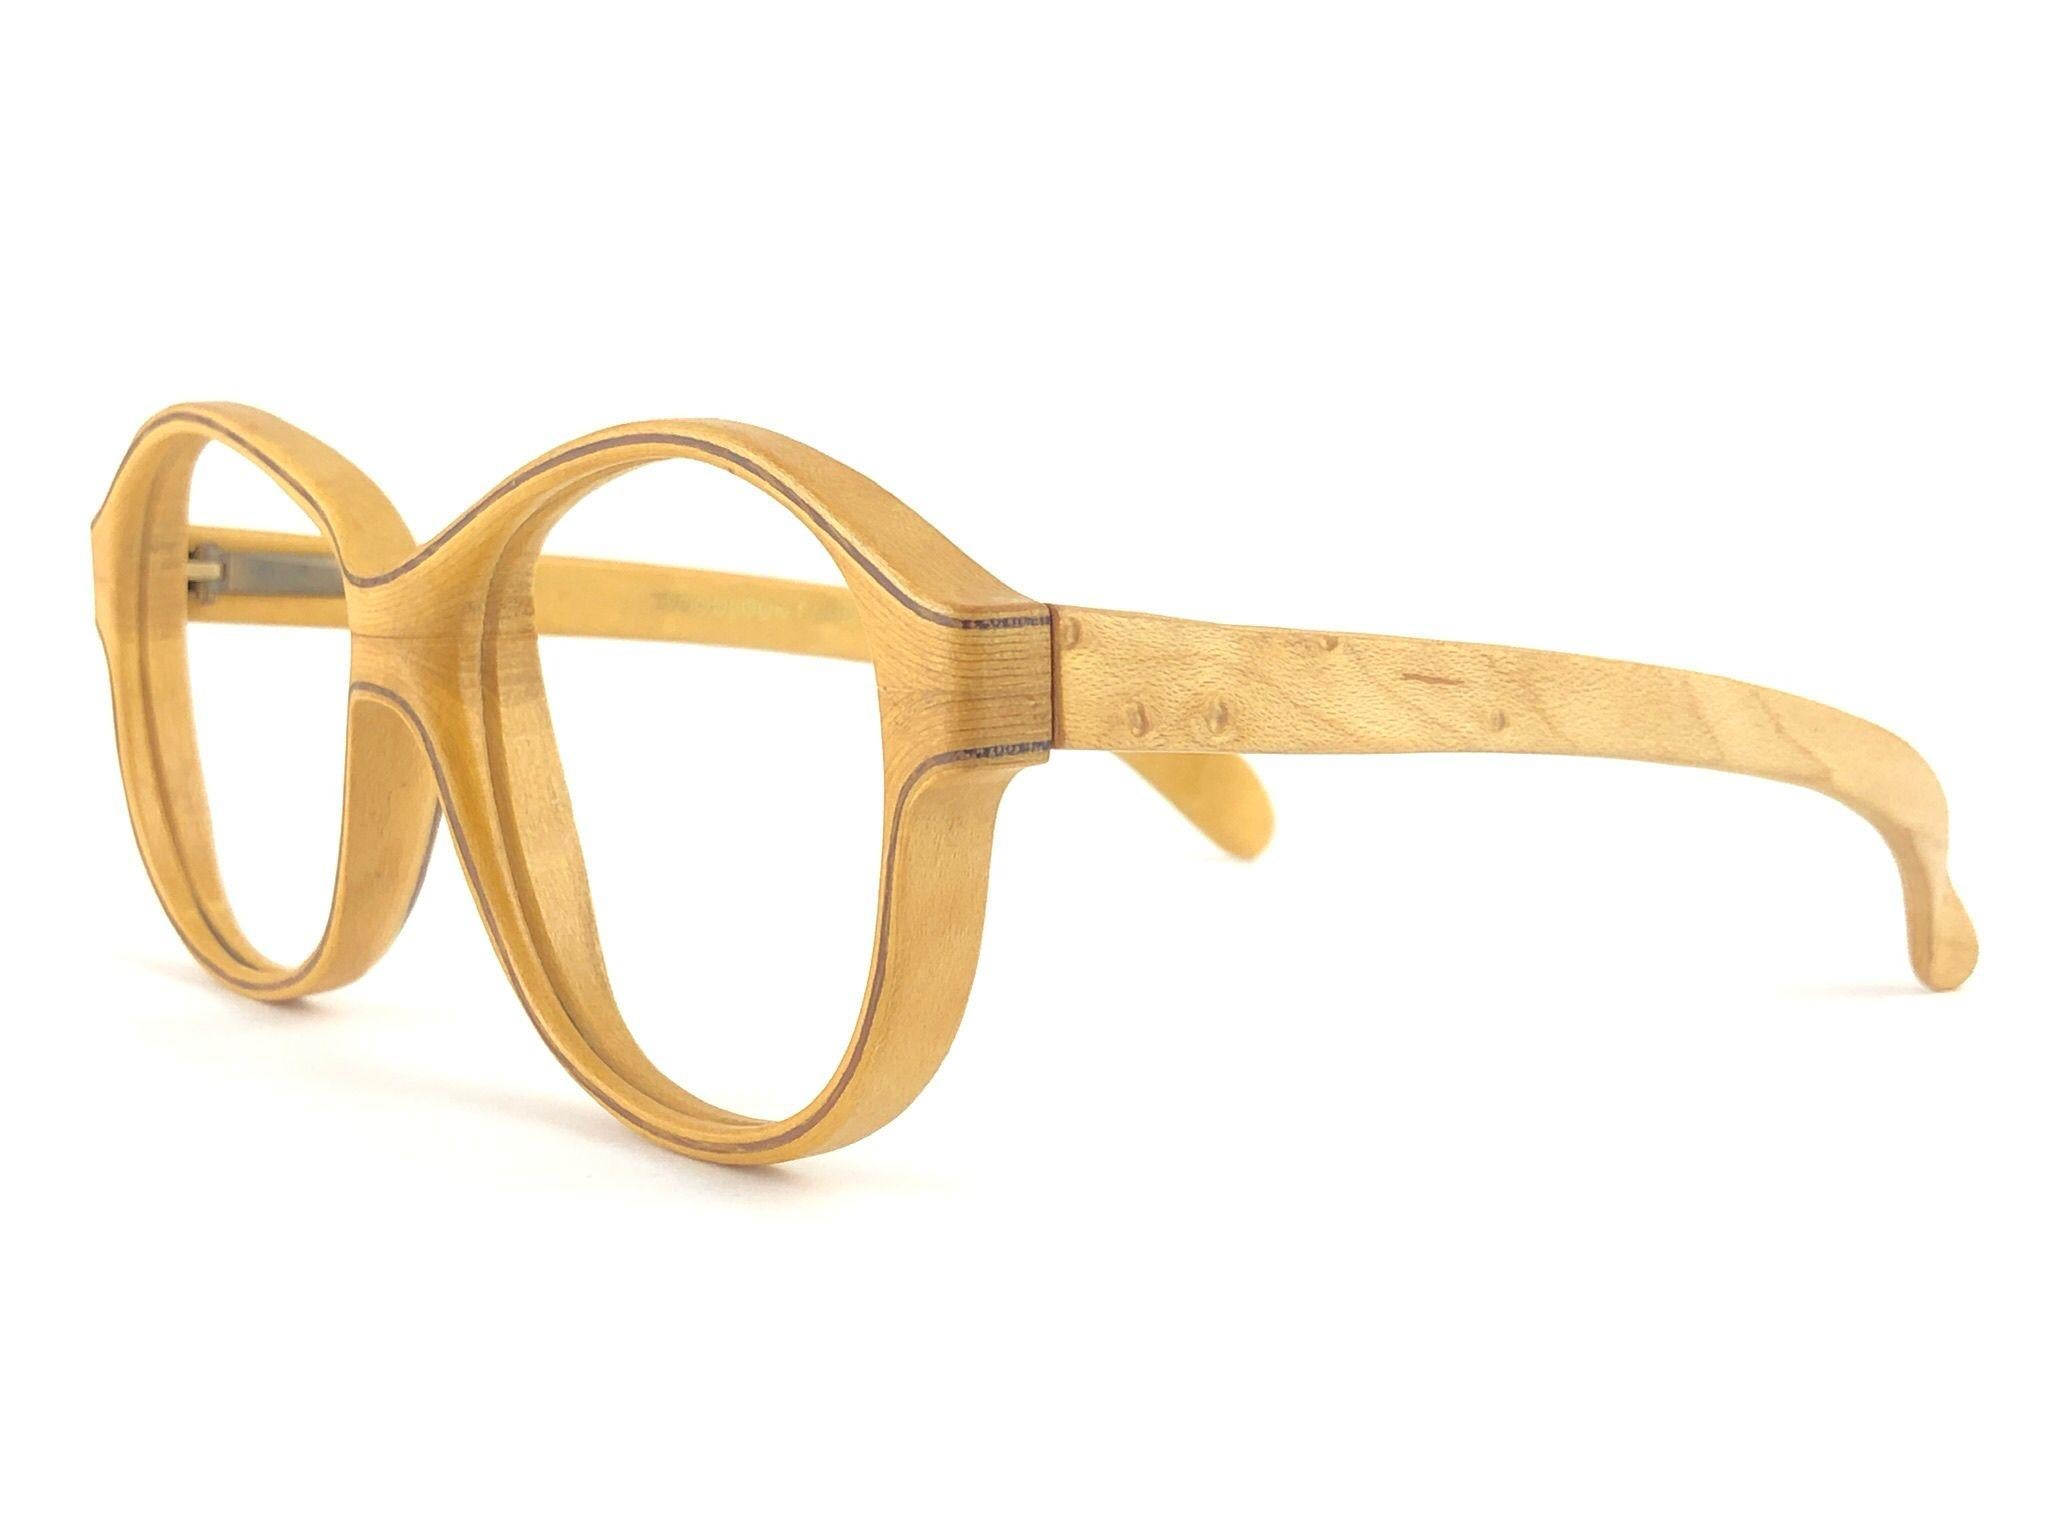 New Vintage Wood Look Paris genuine wood frame perfect for any prescription lenses, also great pair to wear as a sunglasses. 
The spring hinge makes them very confortable to wear.

New, never worn or displayed. This pair may have minor sign of wear